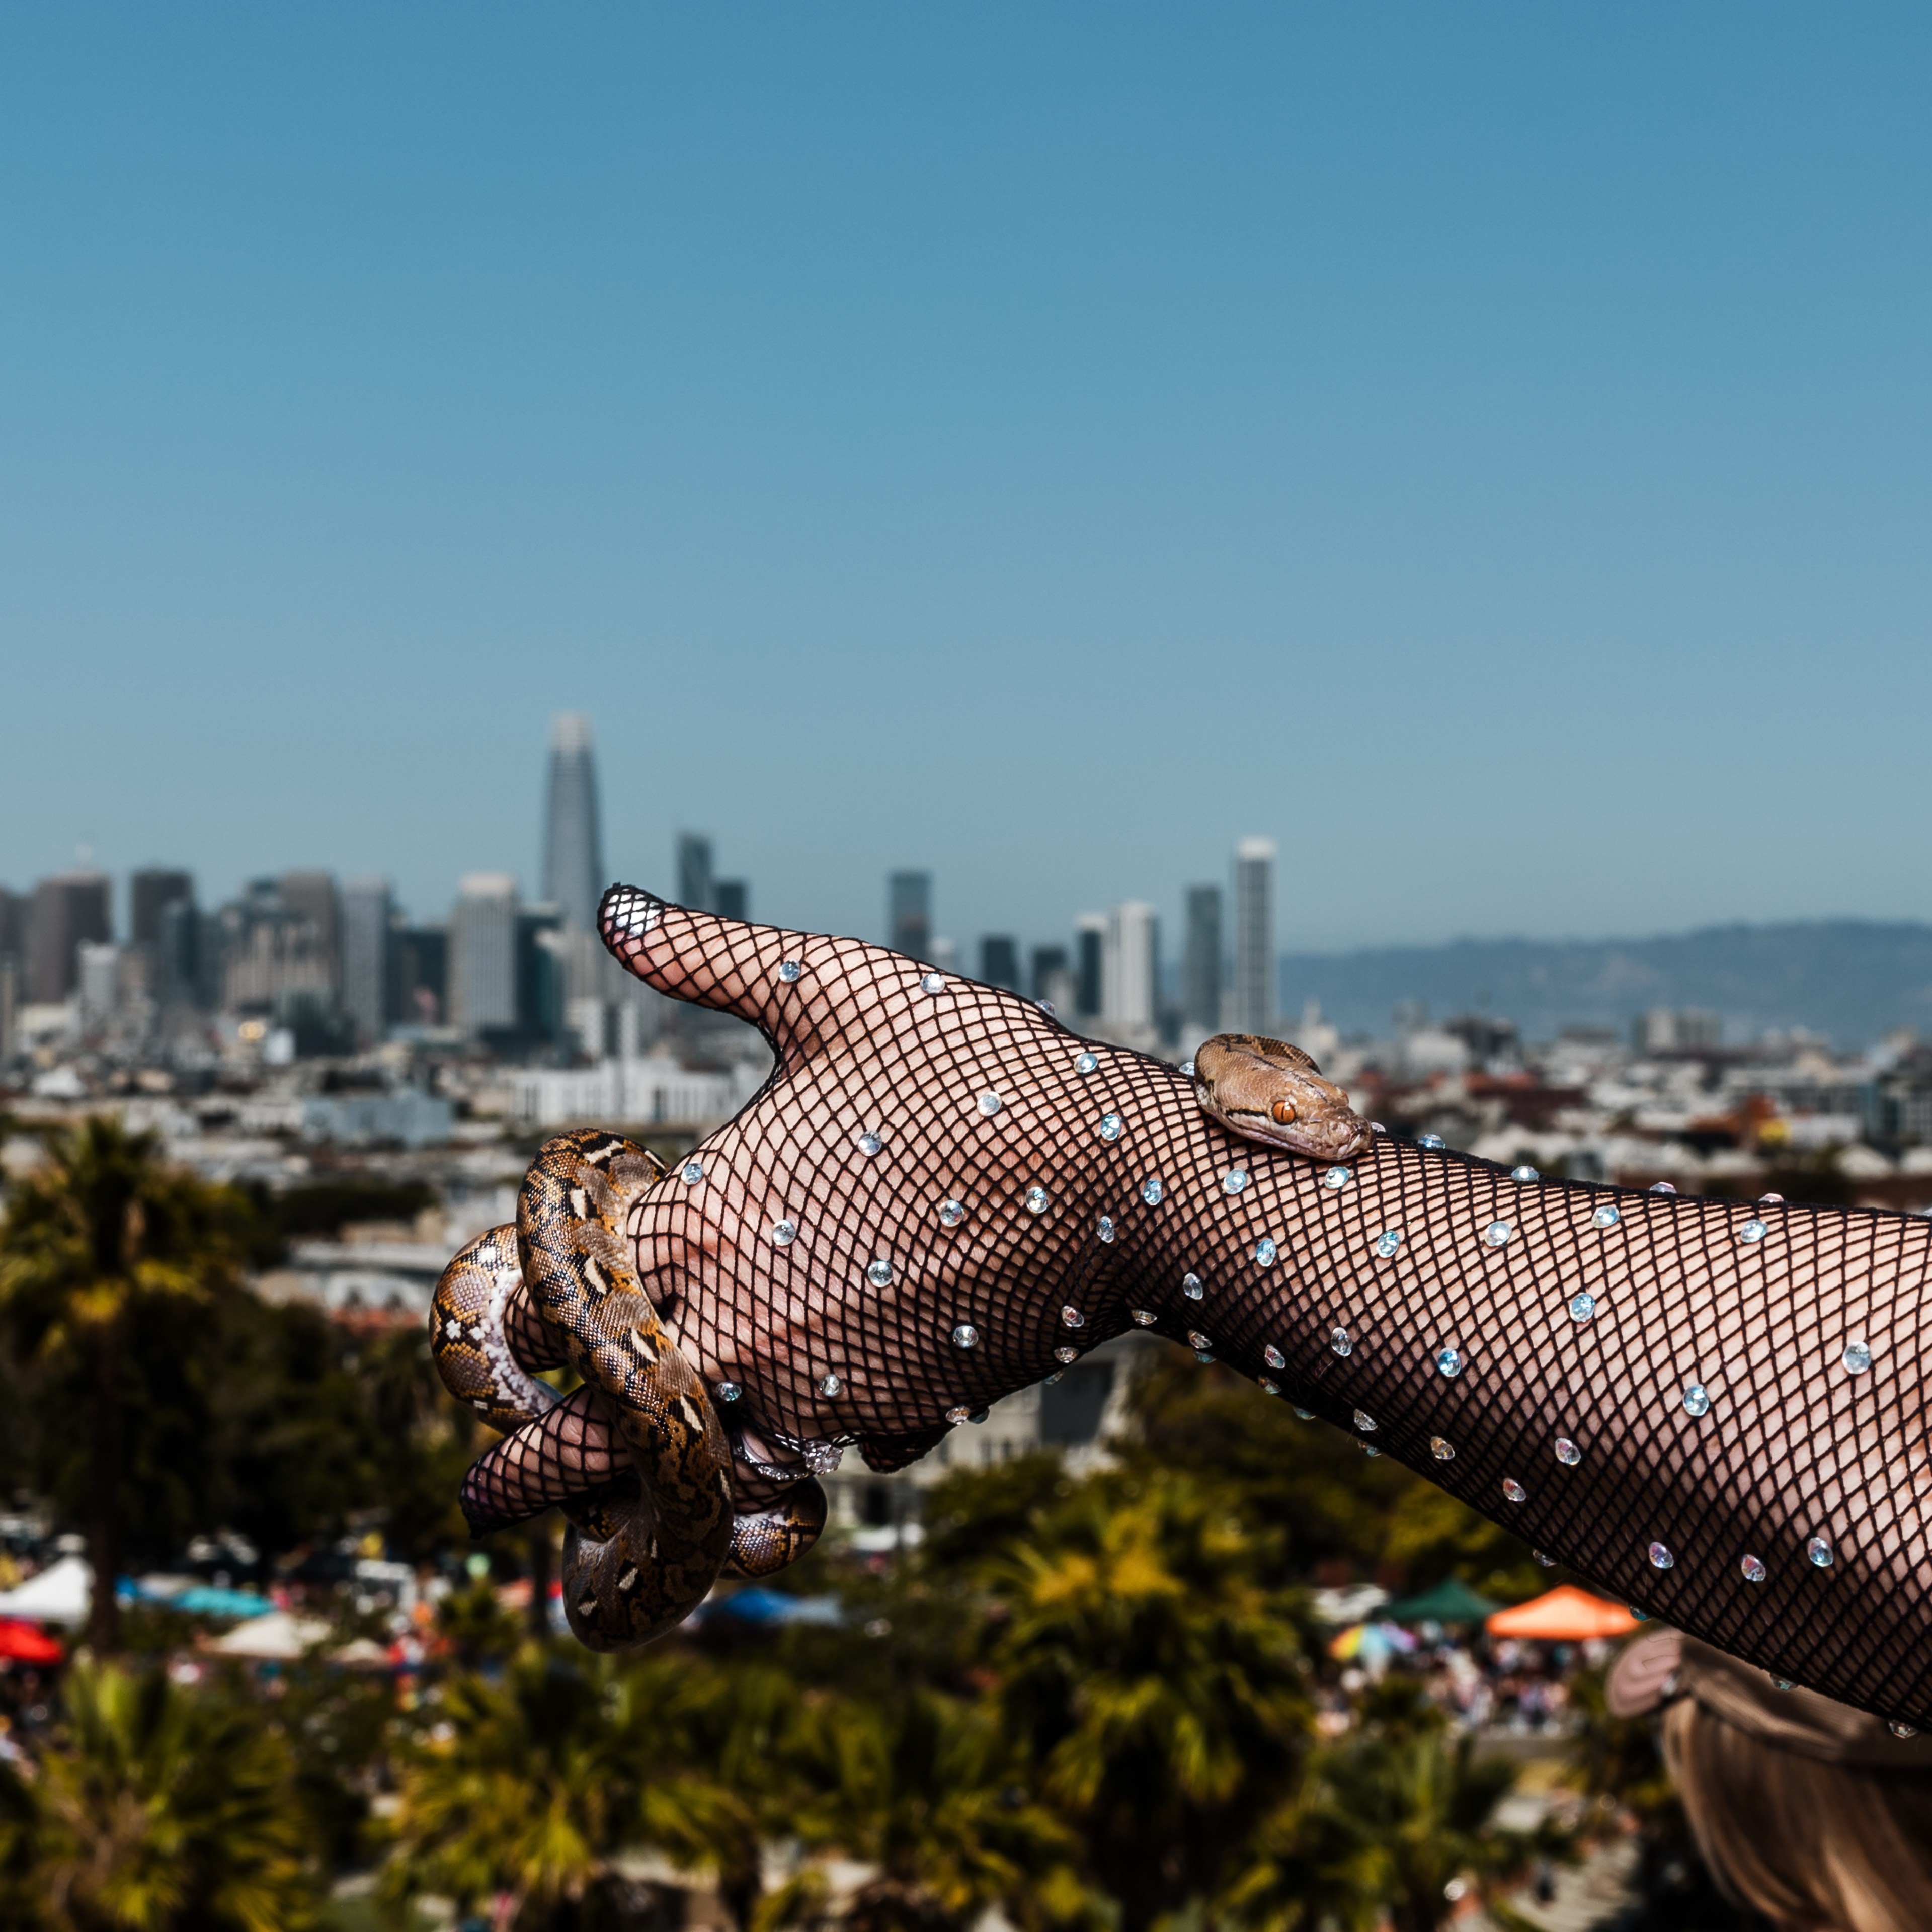 A person wearing a fishnet glove with rhinestones holds a snake against a background of a city skyline, featuring skyscrapers and a clear blue sky.